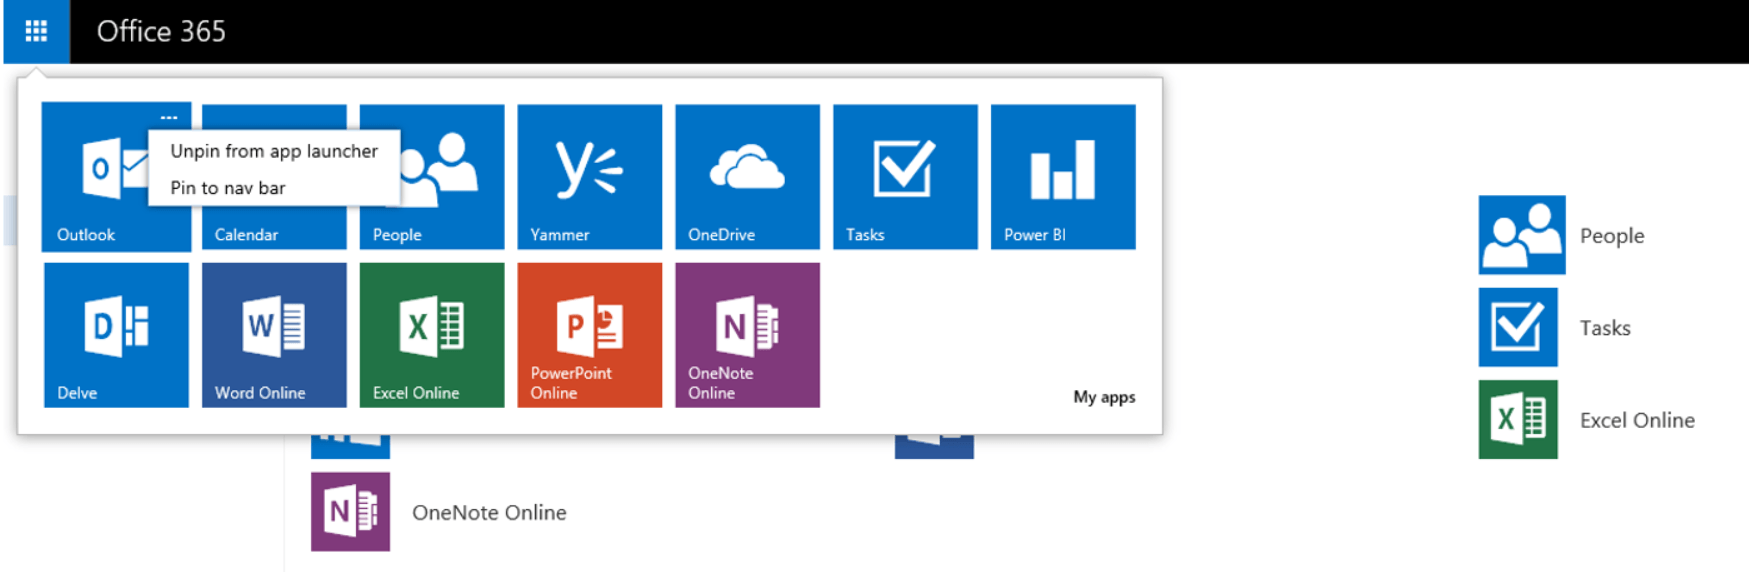 Office App Logo - Organize your Office 365 with the new app launcher - Microsoft 365 Blog